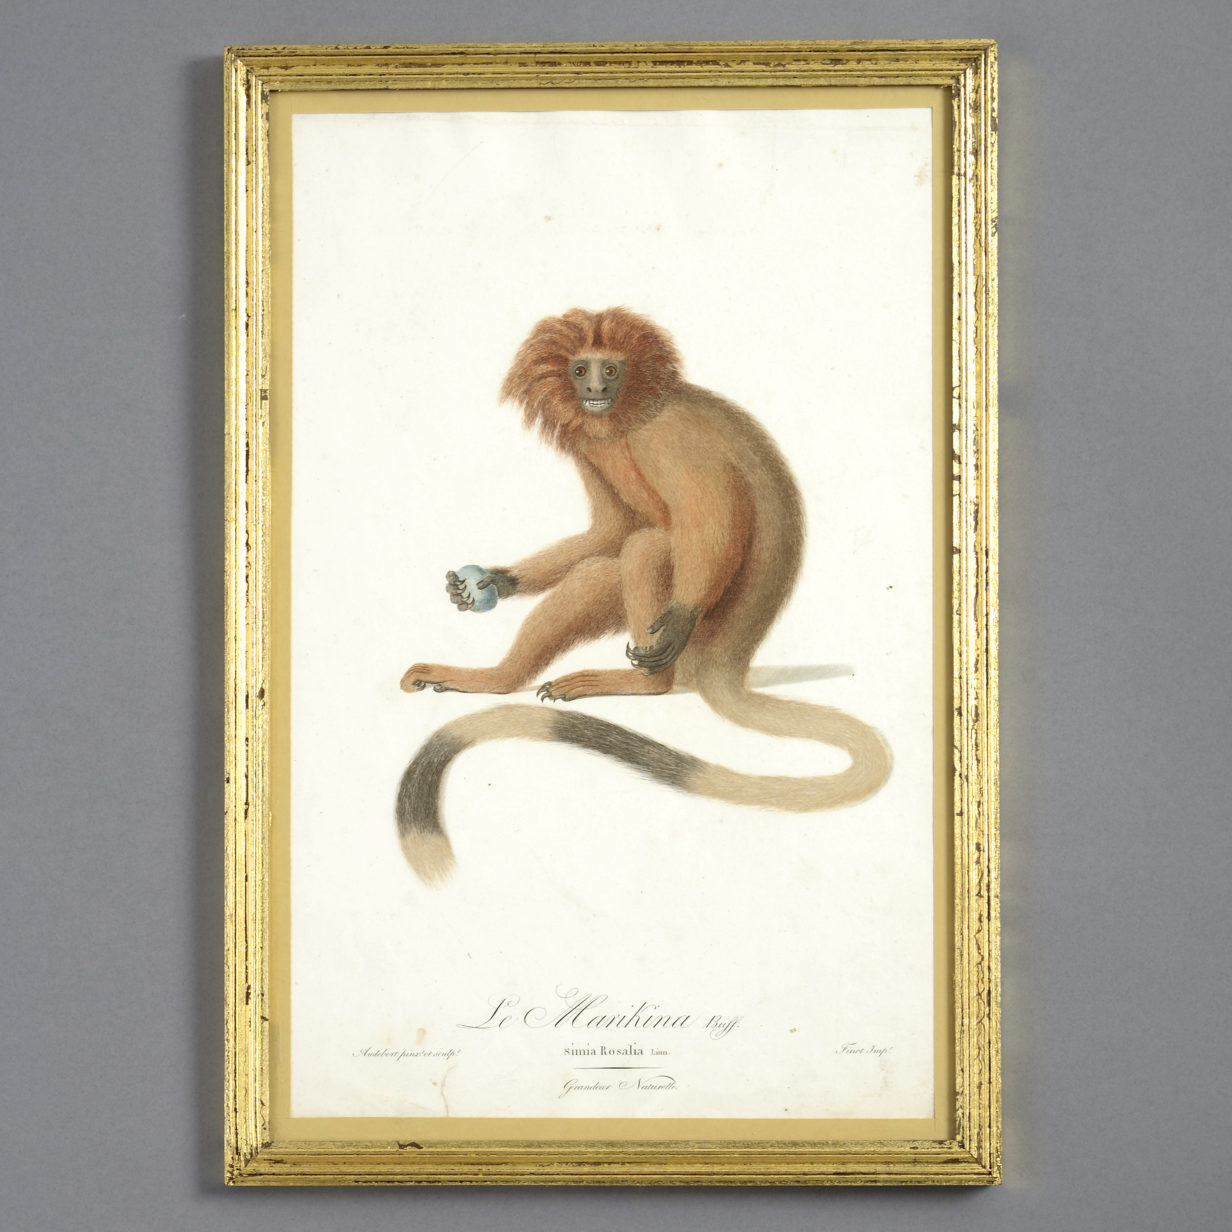 Four Late 18th Century Hand-coloured Monkey Engravings